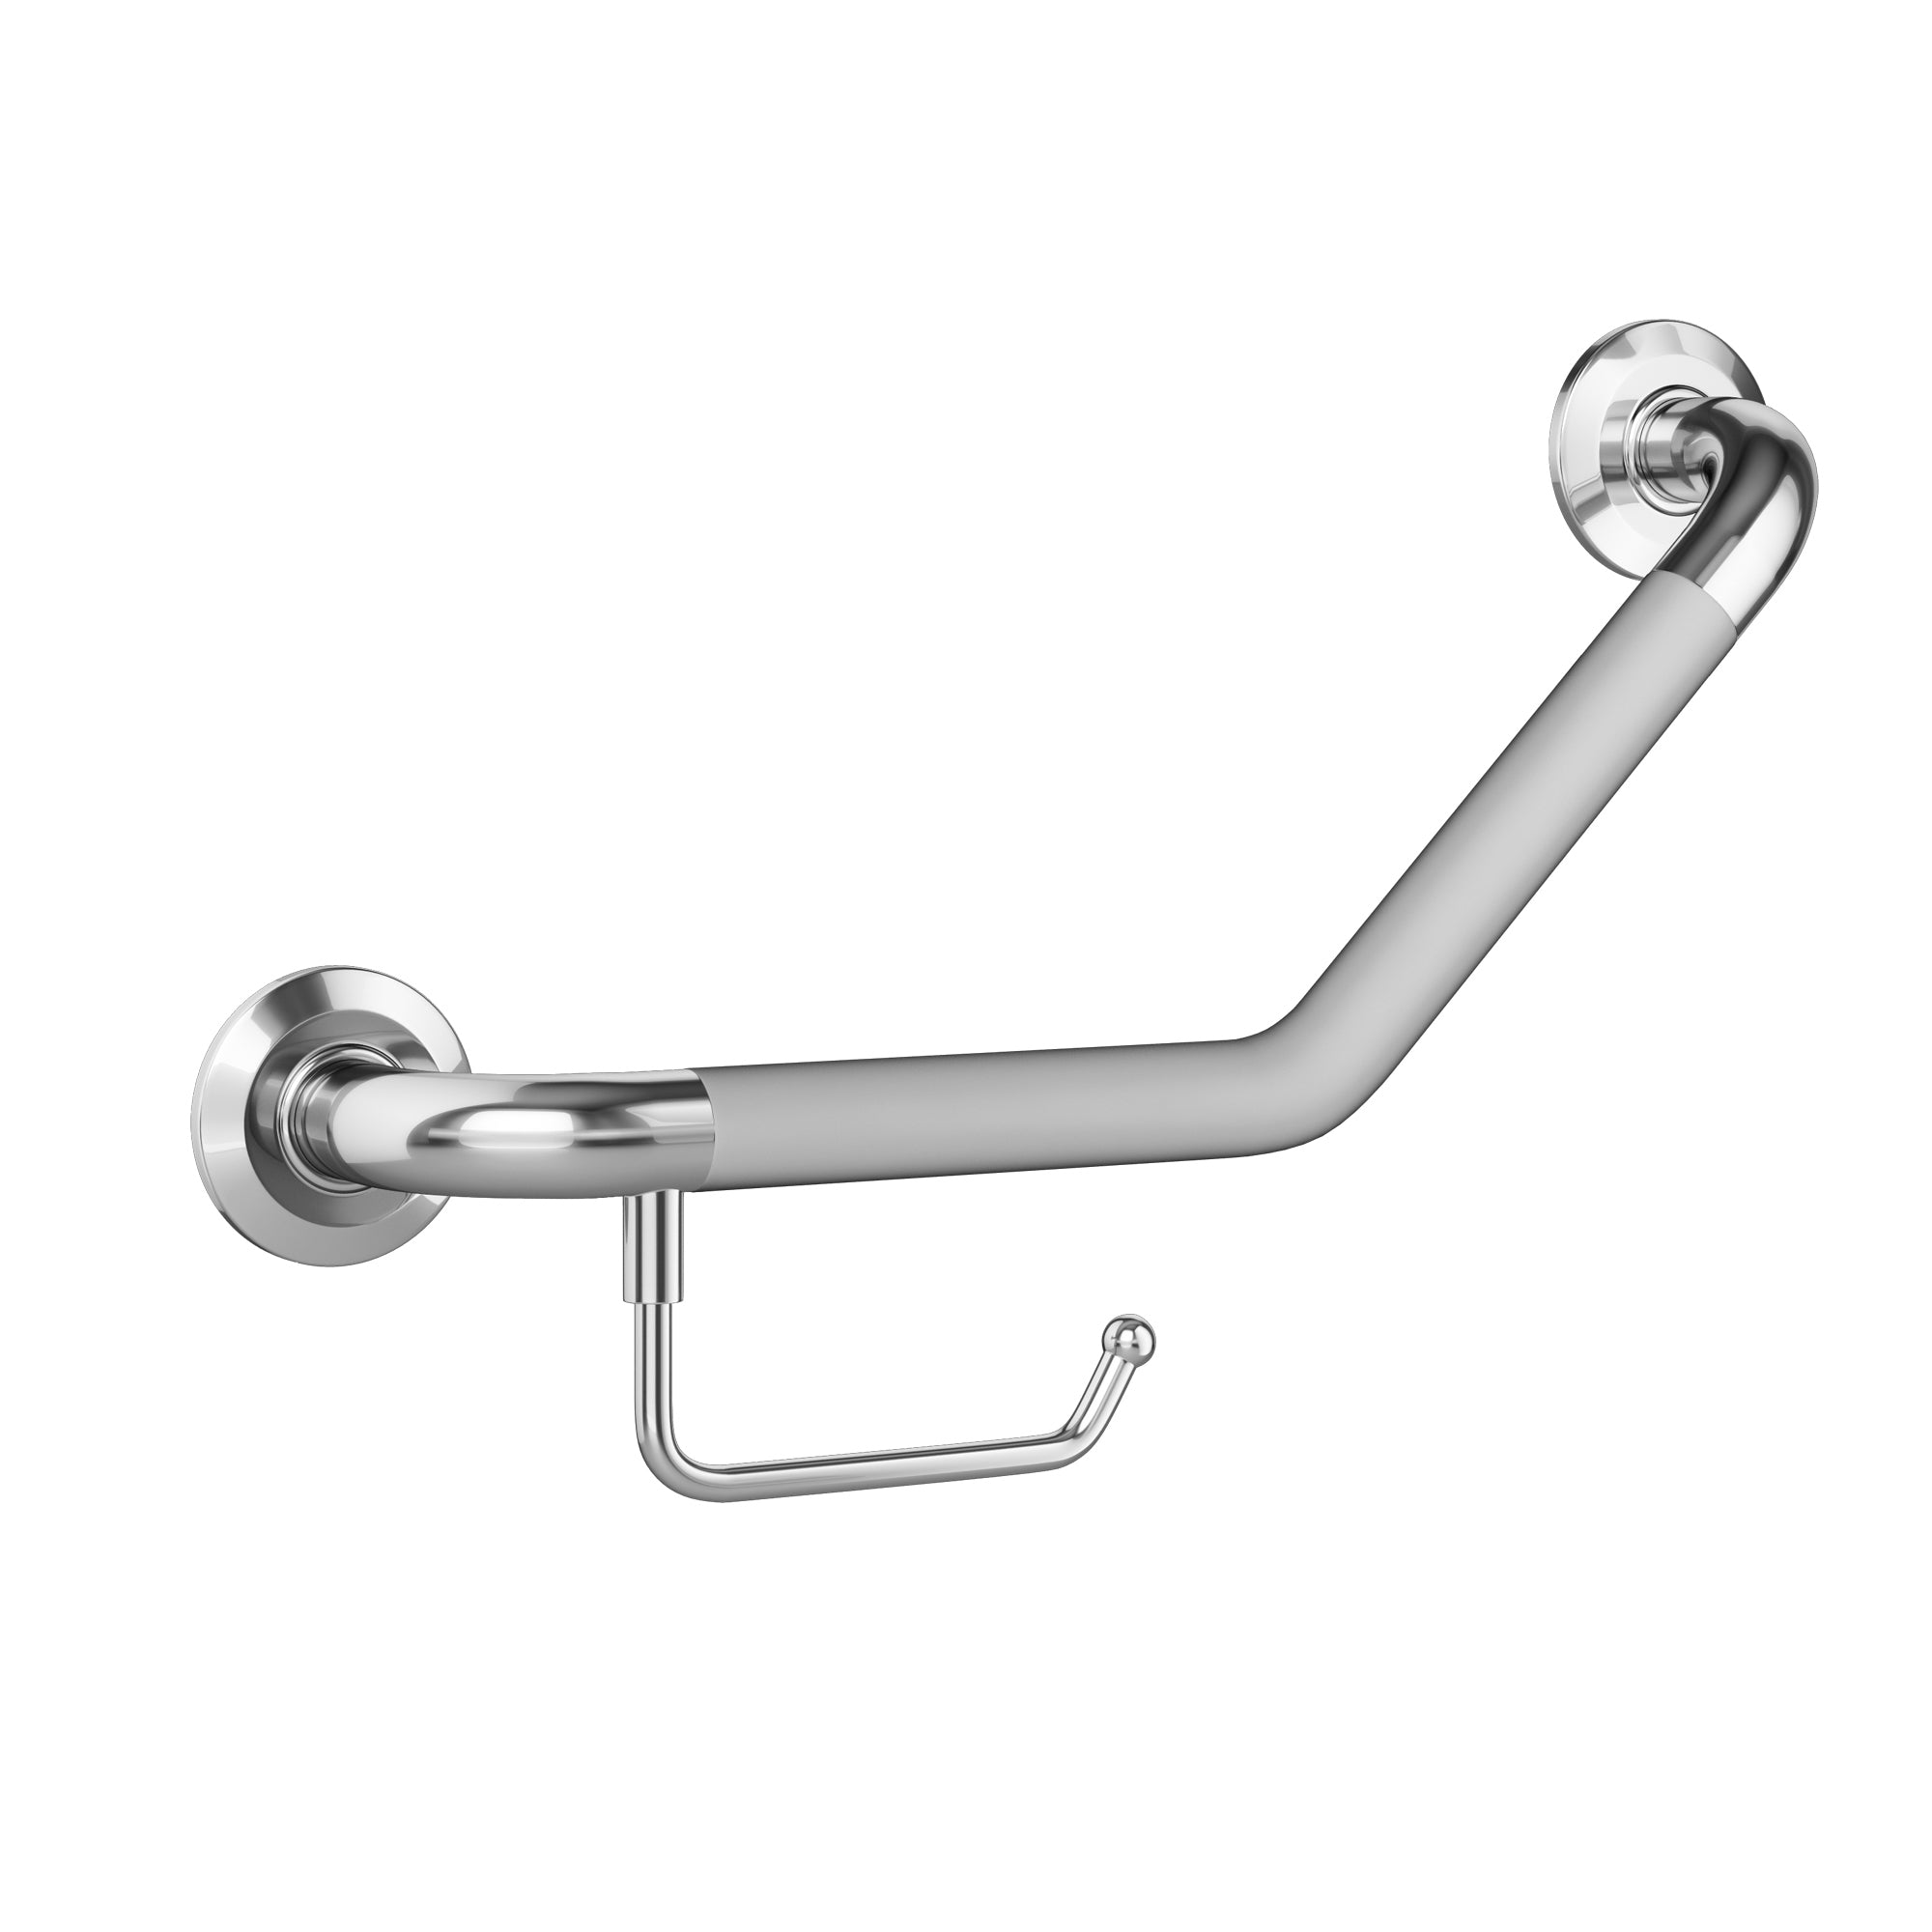 PULSE Ergo Angle Bar - Made of 304 Stainless Steel - with a decorative angled design - Safety bar in brushed stainless finish - with Ergonomic soft grip and Toilet Paper Holder - 4007 - Vital Hydrotherapy